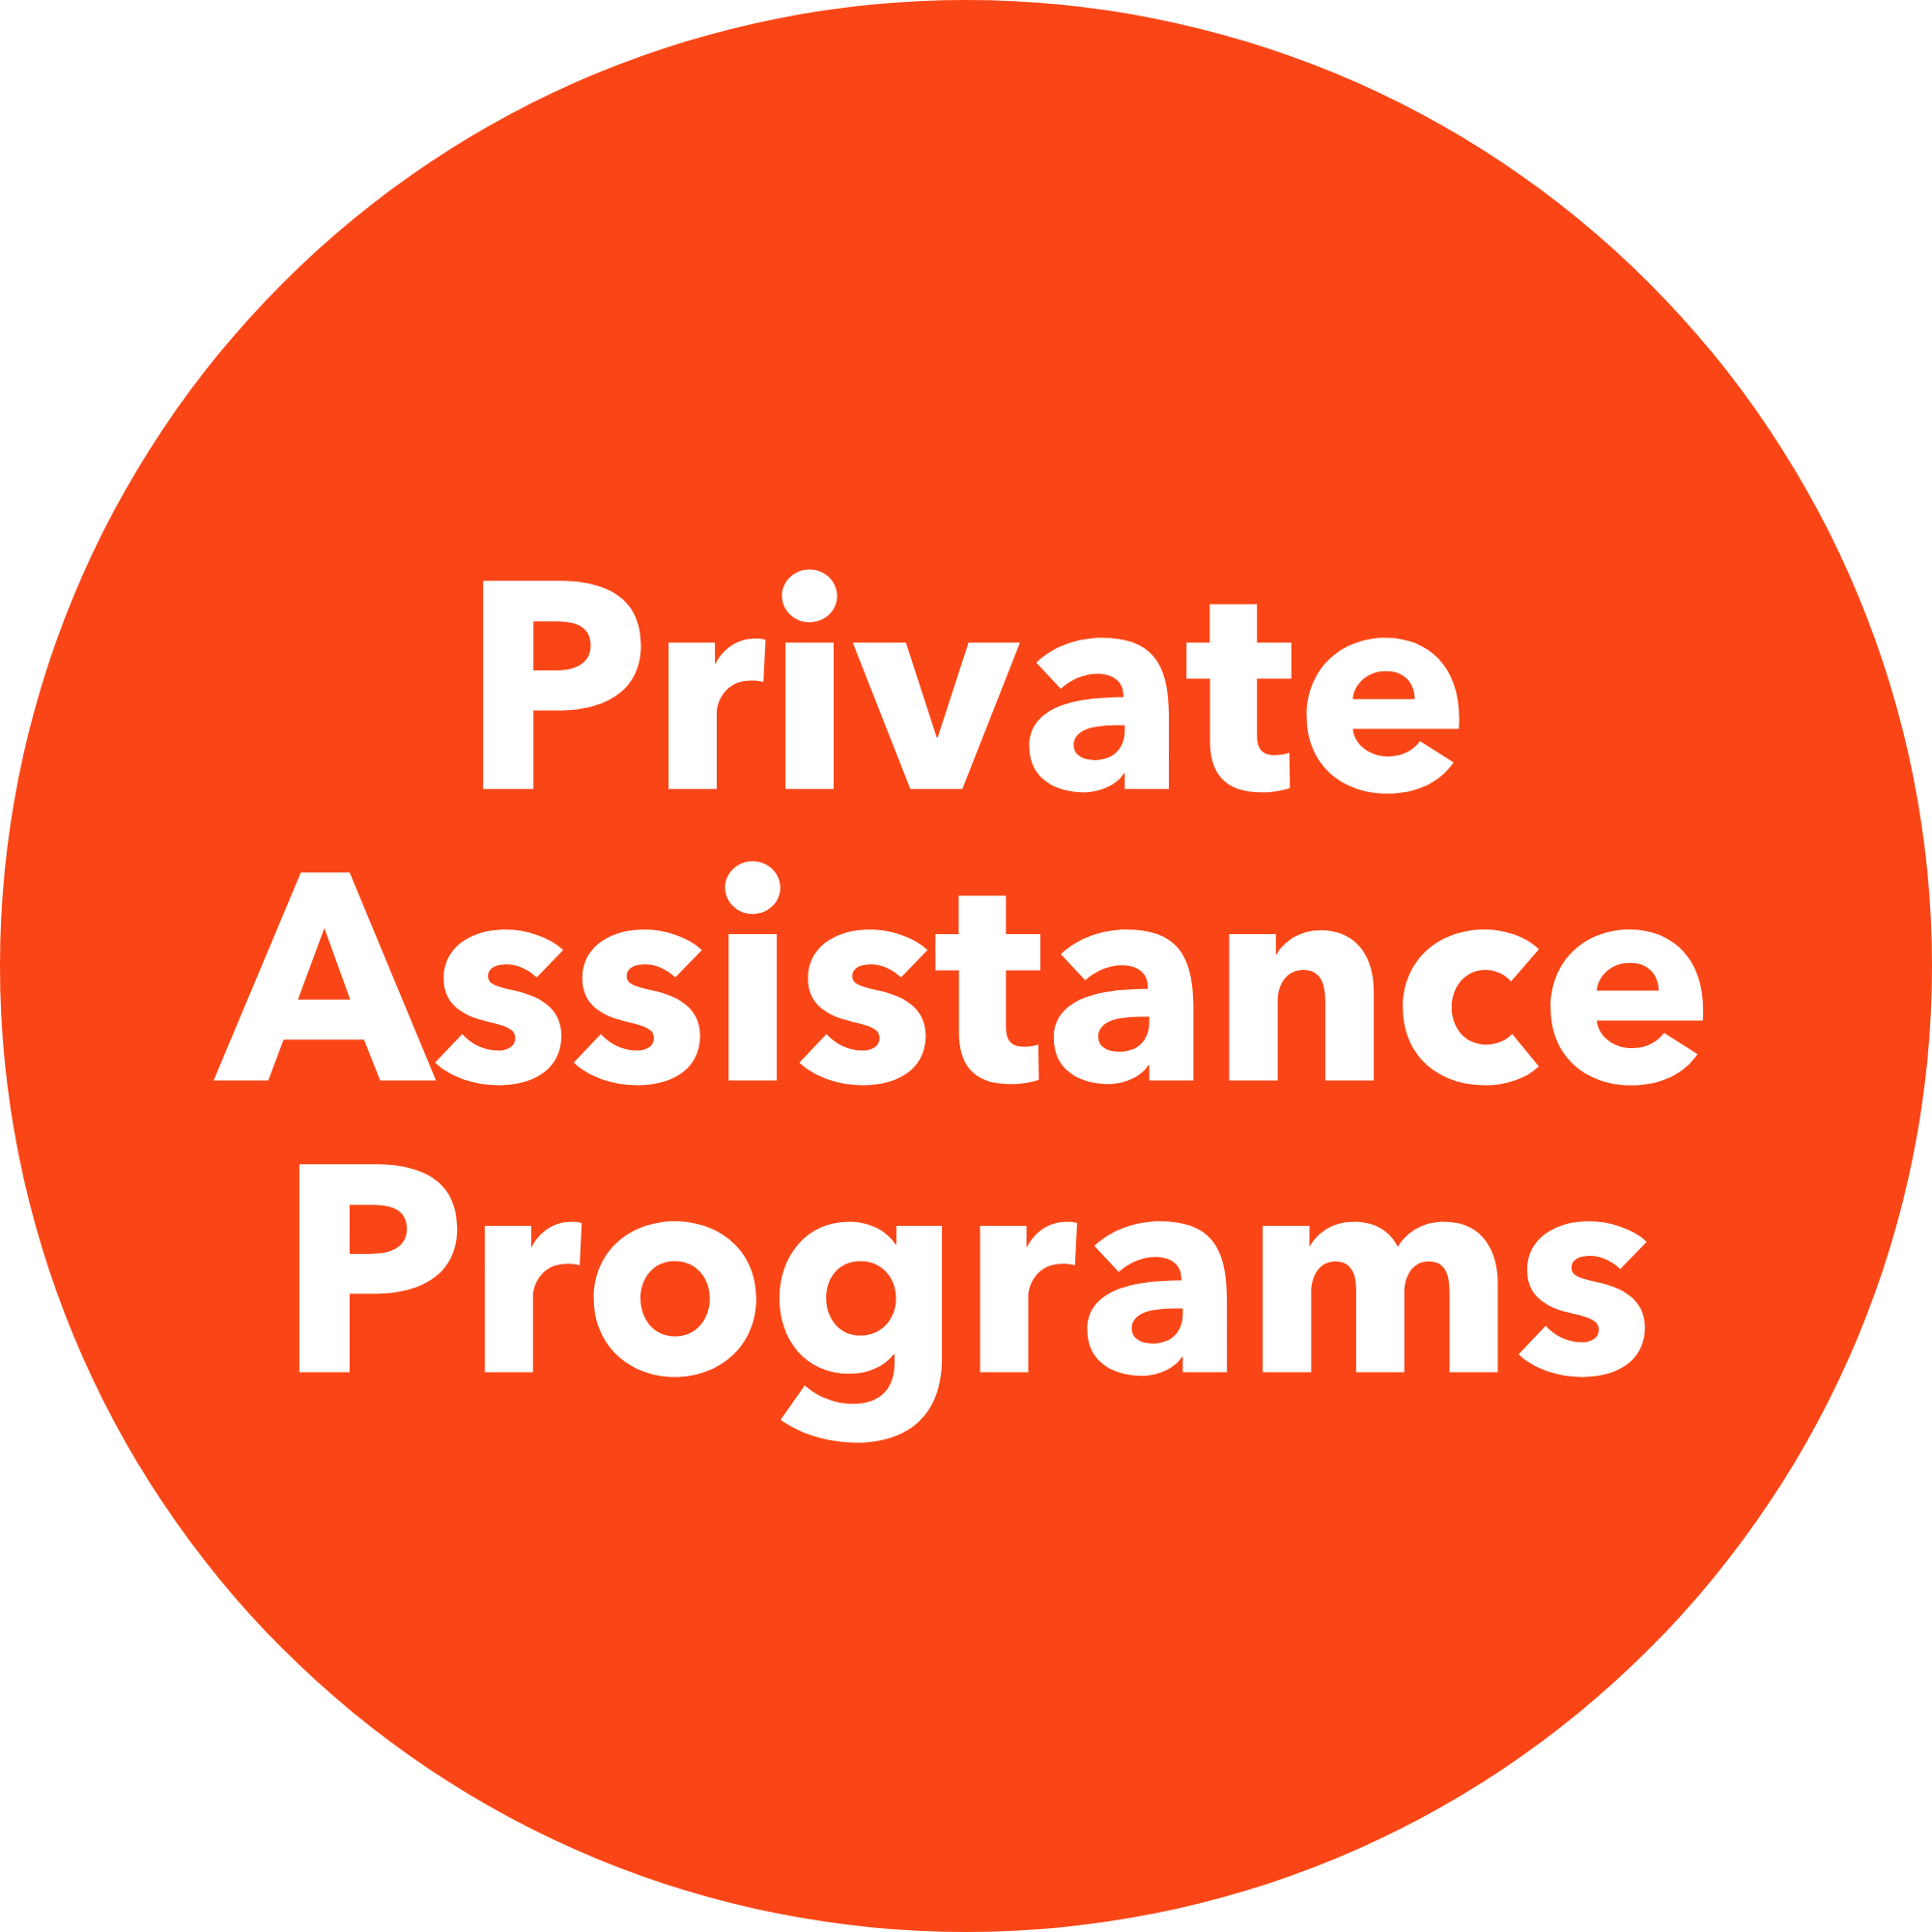 Private Assistance Programs